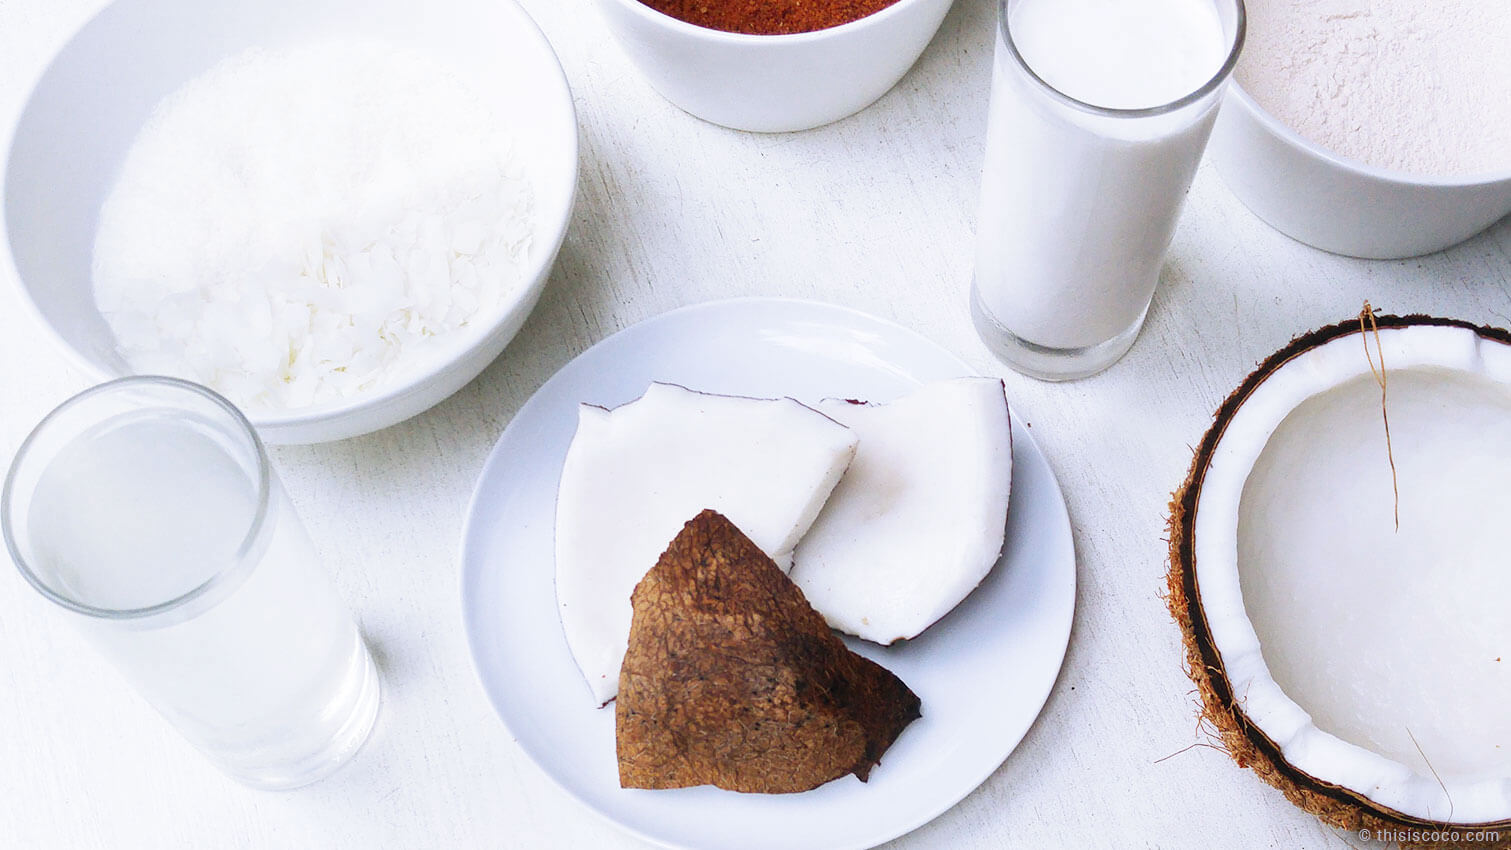 The coconut products guide: 23 vegan coconut foods